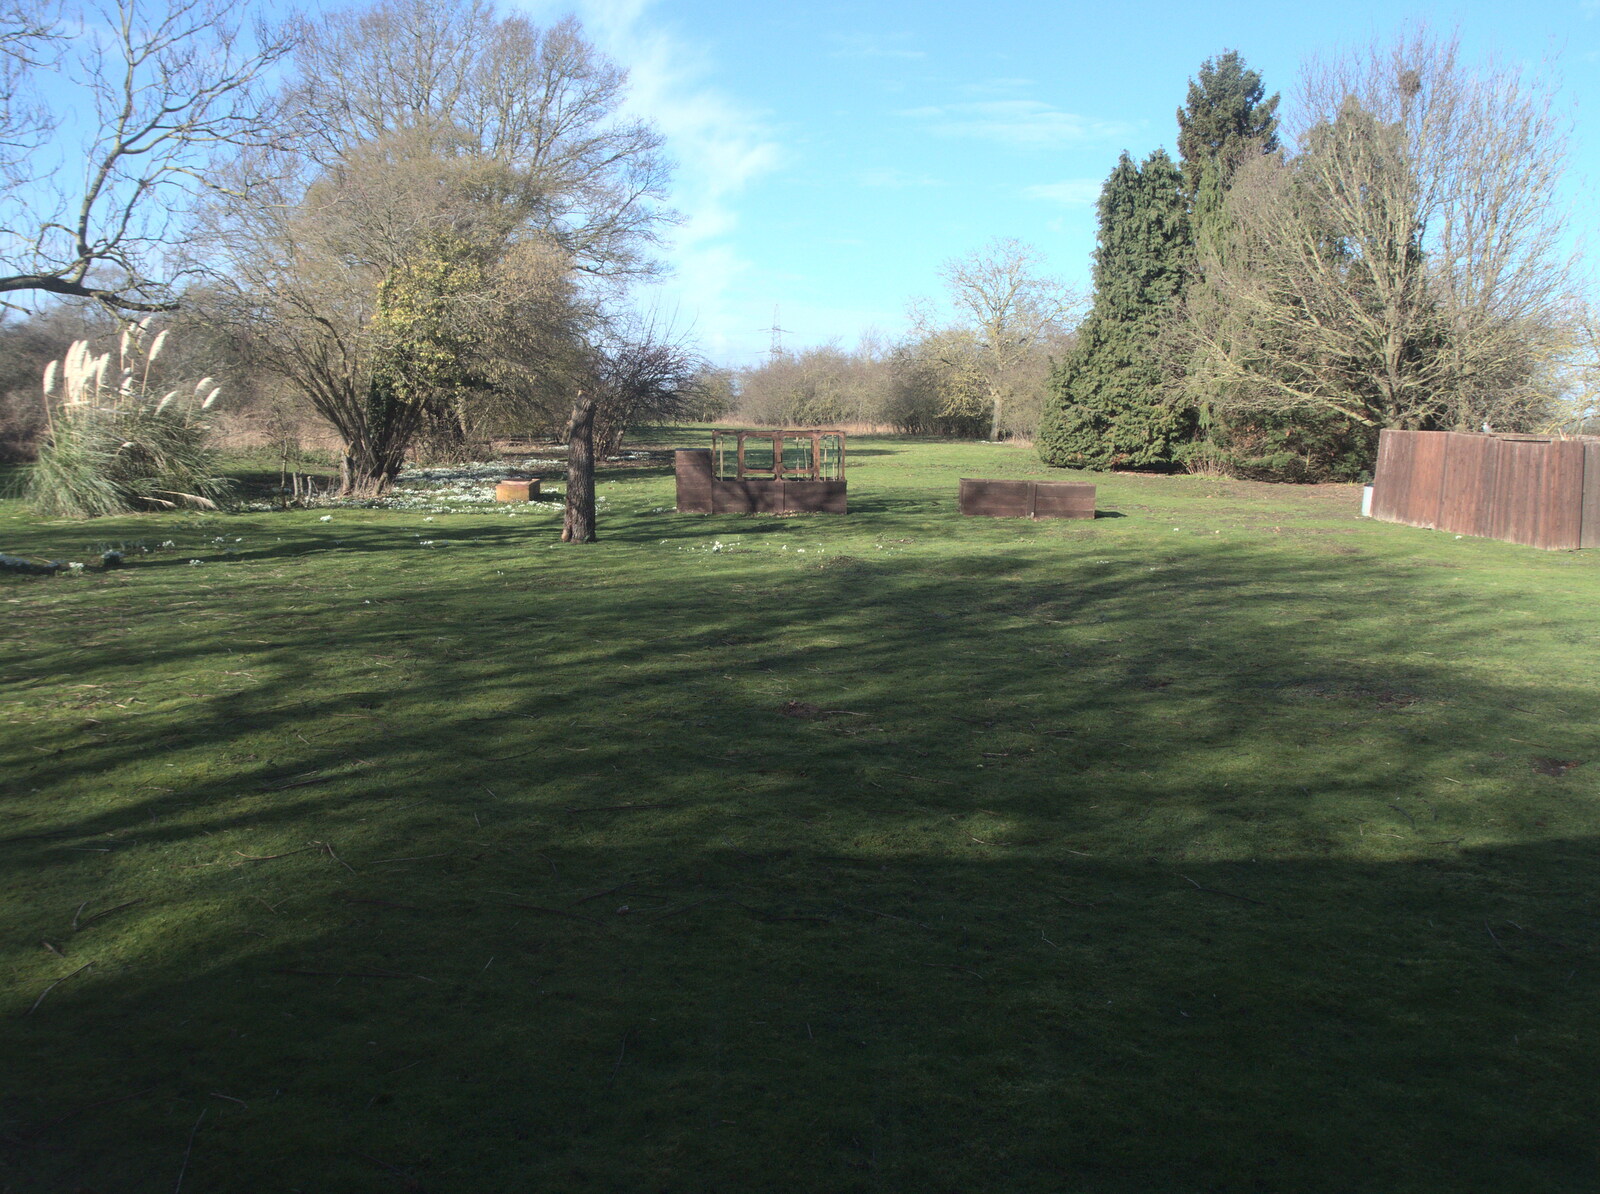 The Swan's back garden from The Swan Inn: An Epilogue, Brome, Suffolk - 17th February 2022